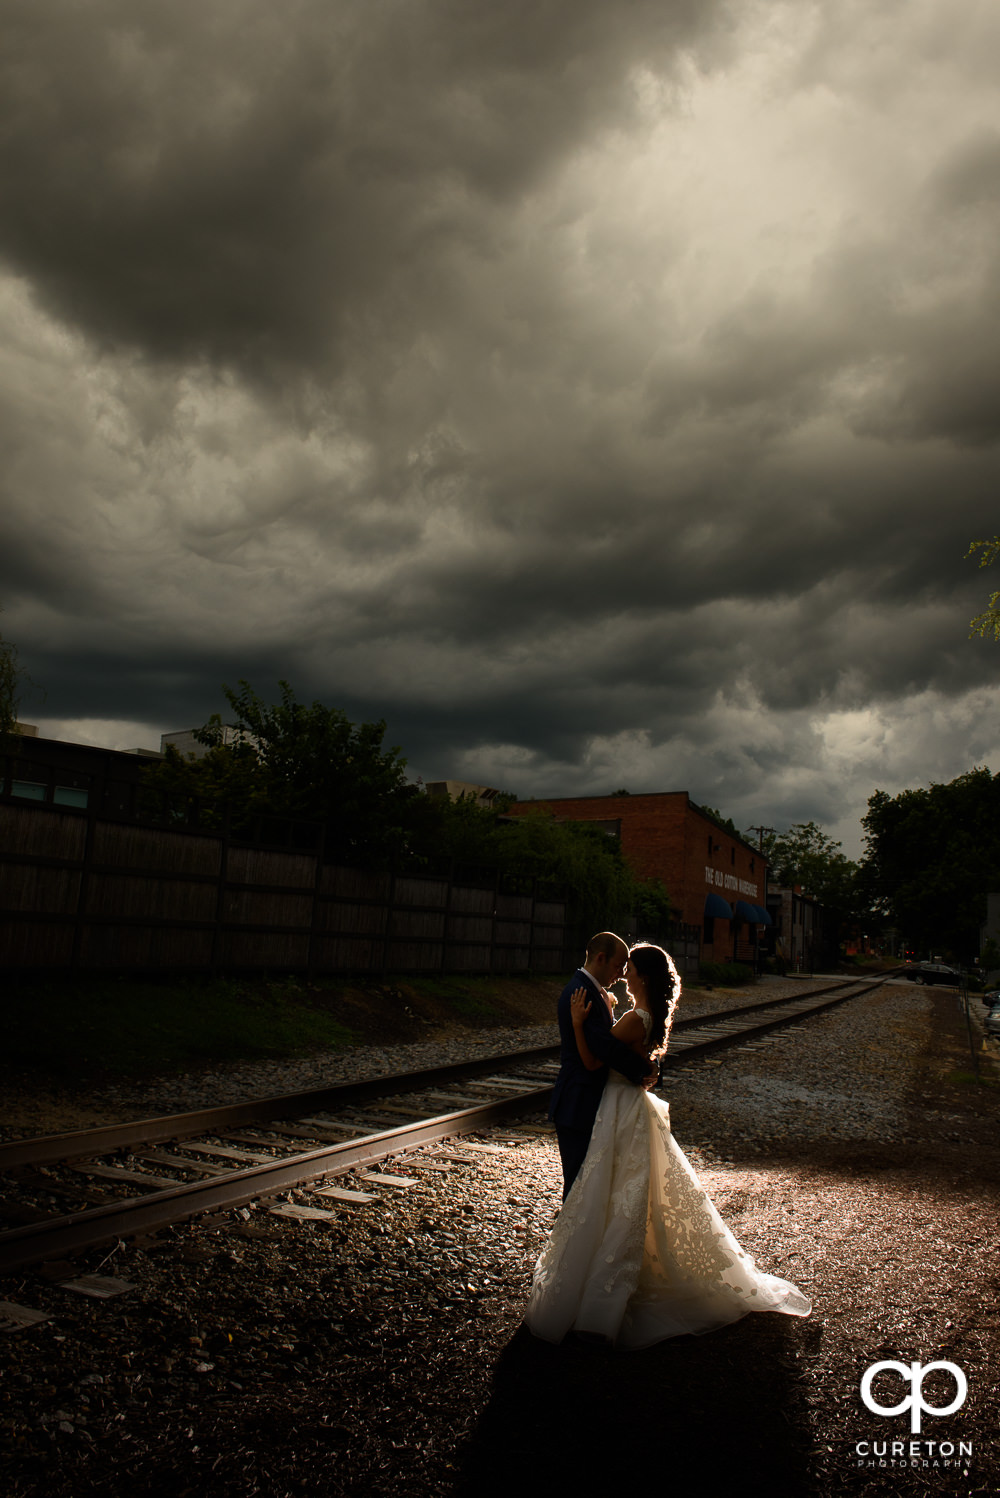 Bride and groom at sunset outside their wedding reception at The Old Cigar Warehouse in downtown Greenville.